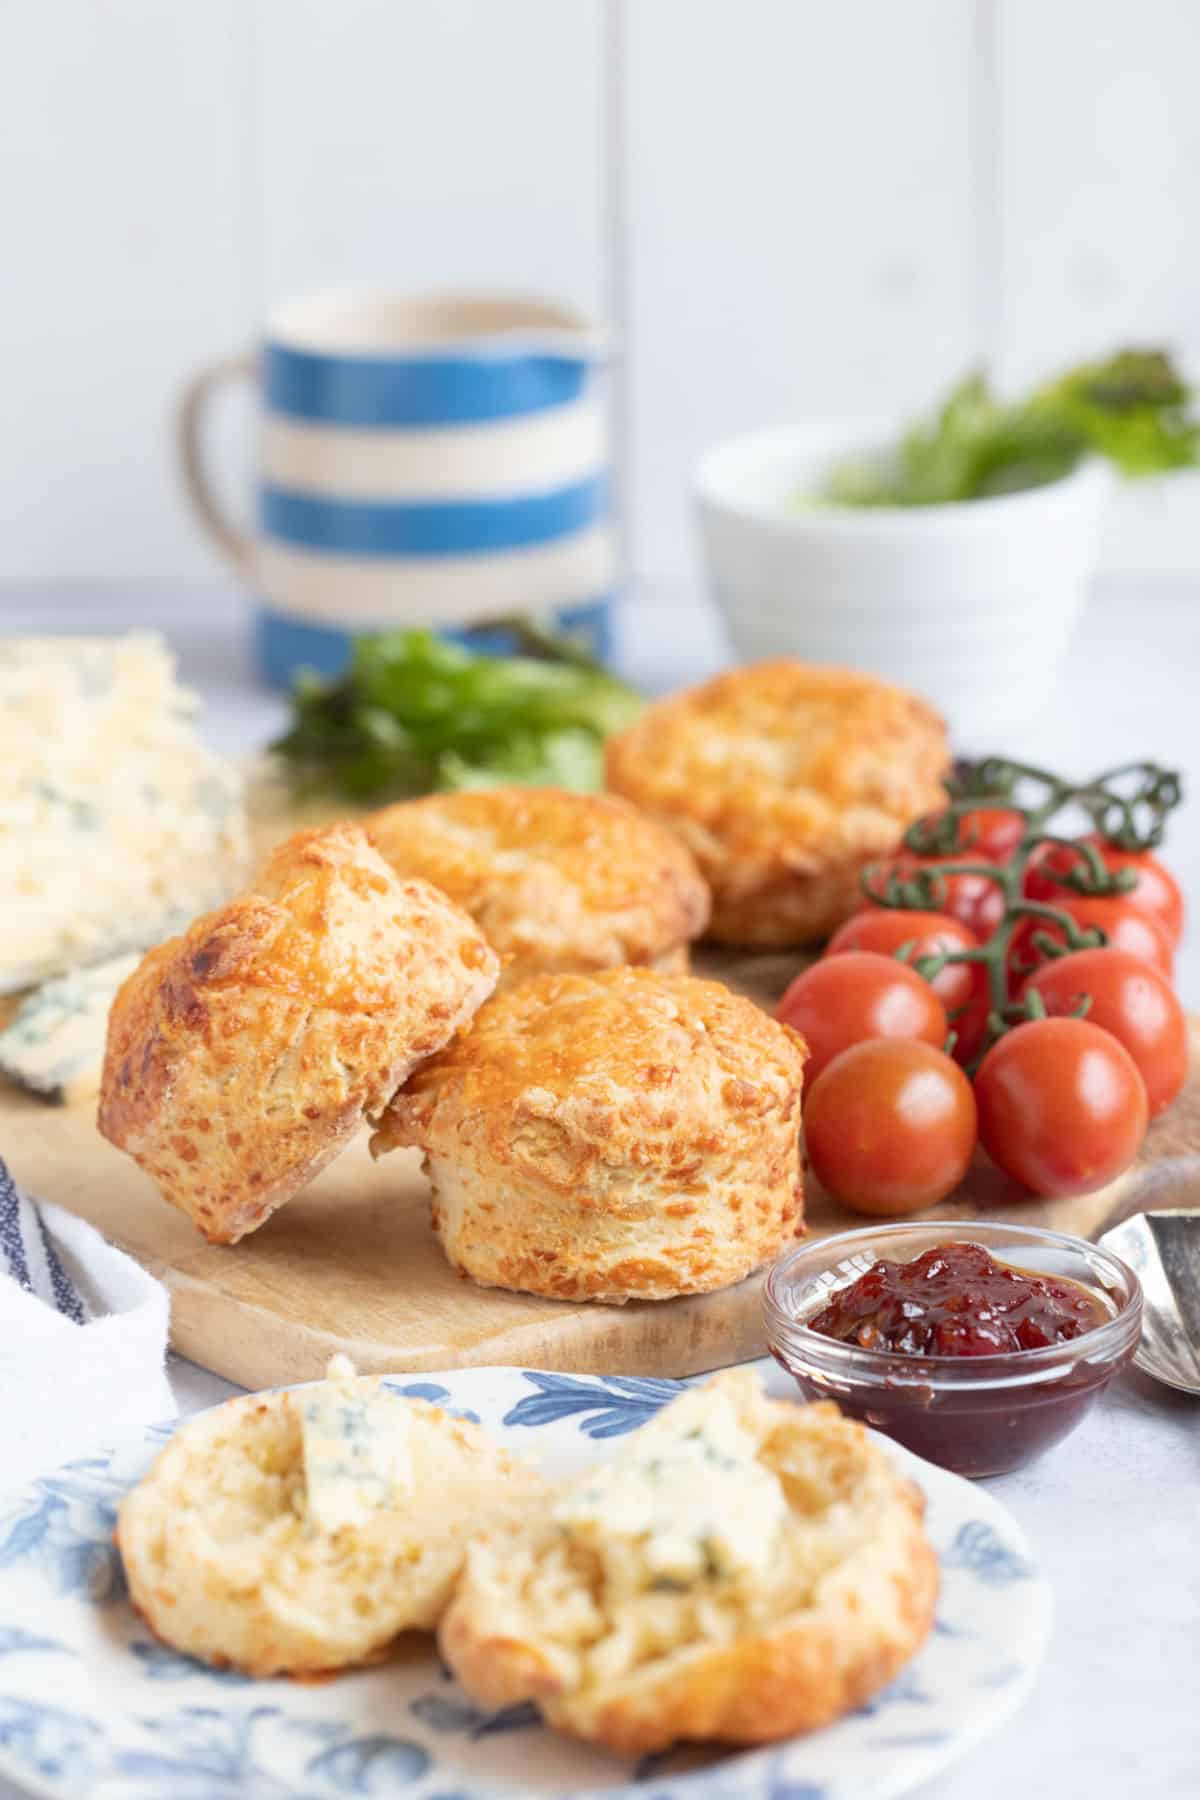 Cheese scones on a wooden board.